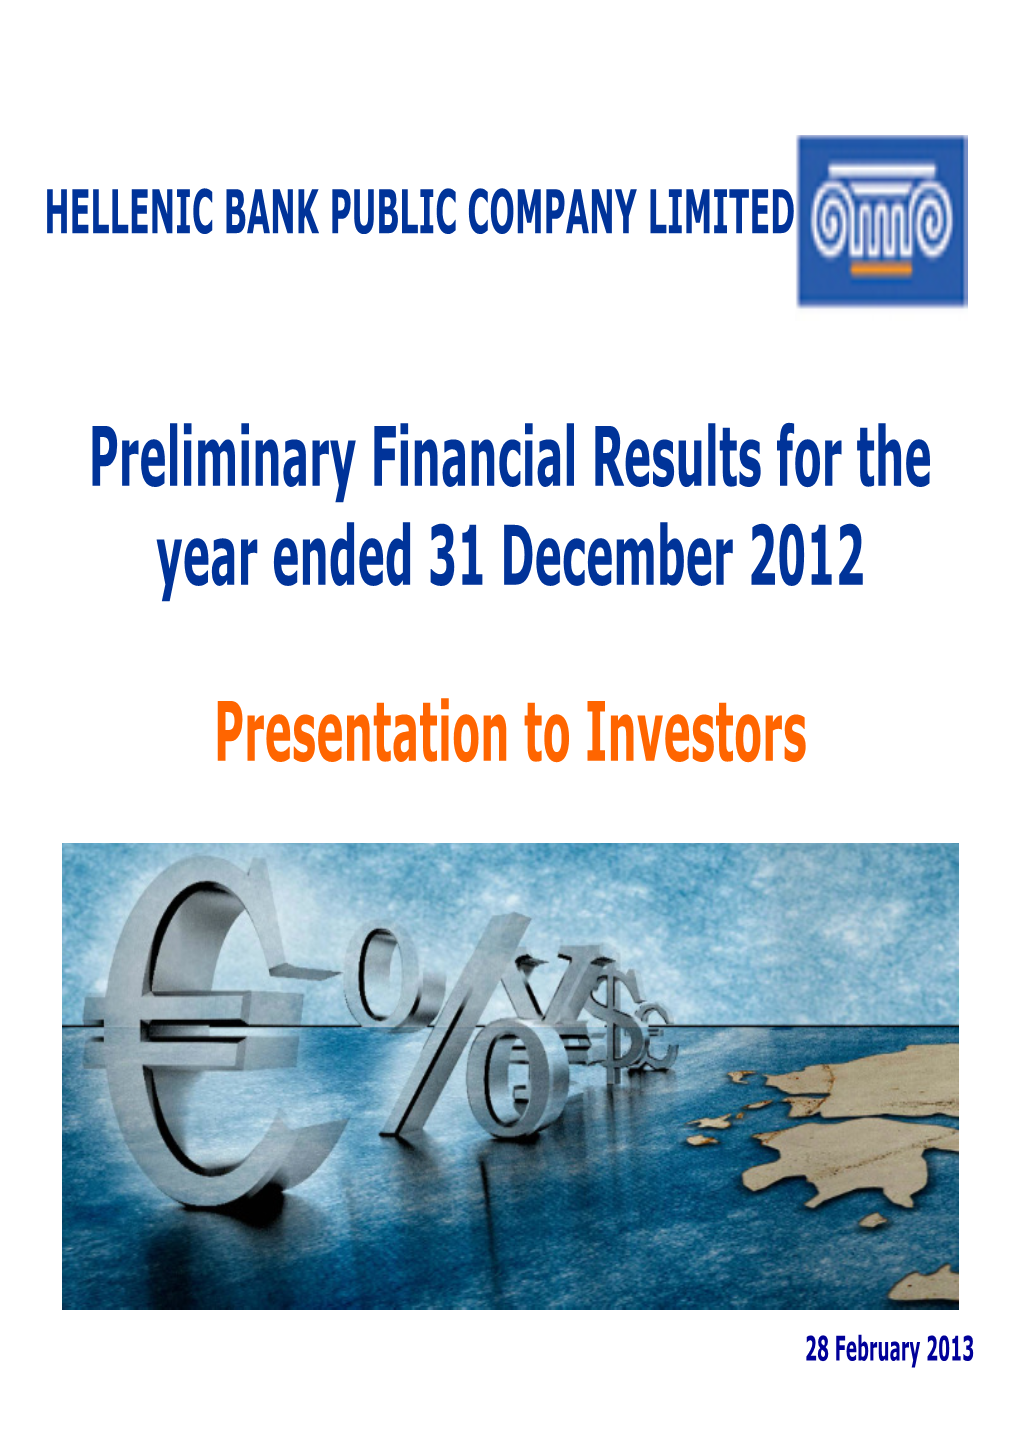 Preliminary Financial Results for the Year Ended 31 December 2012